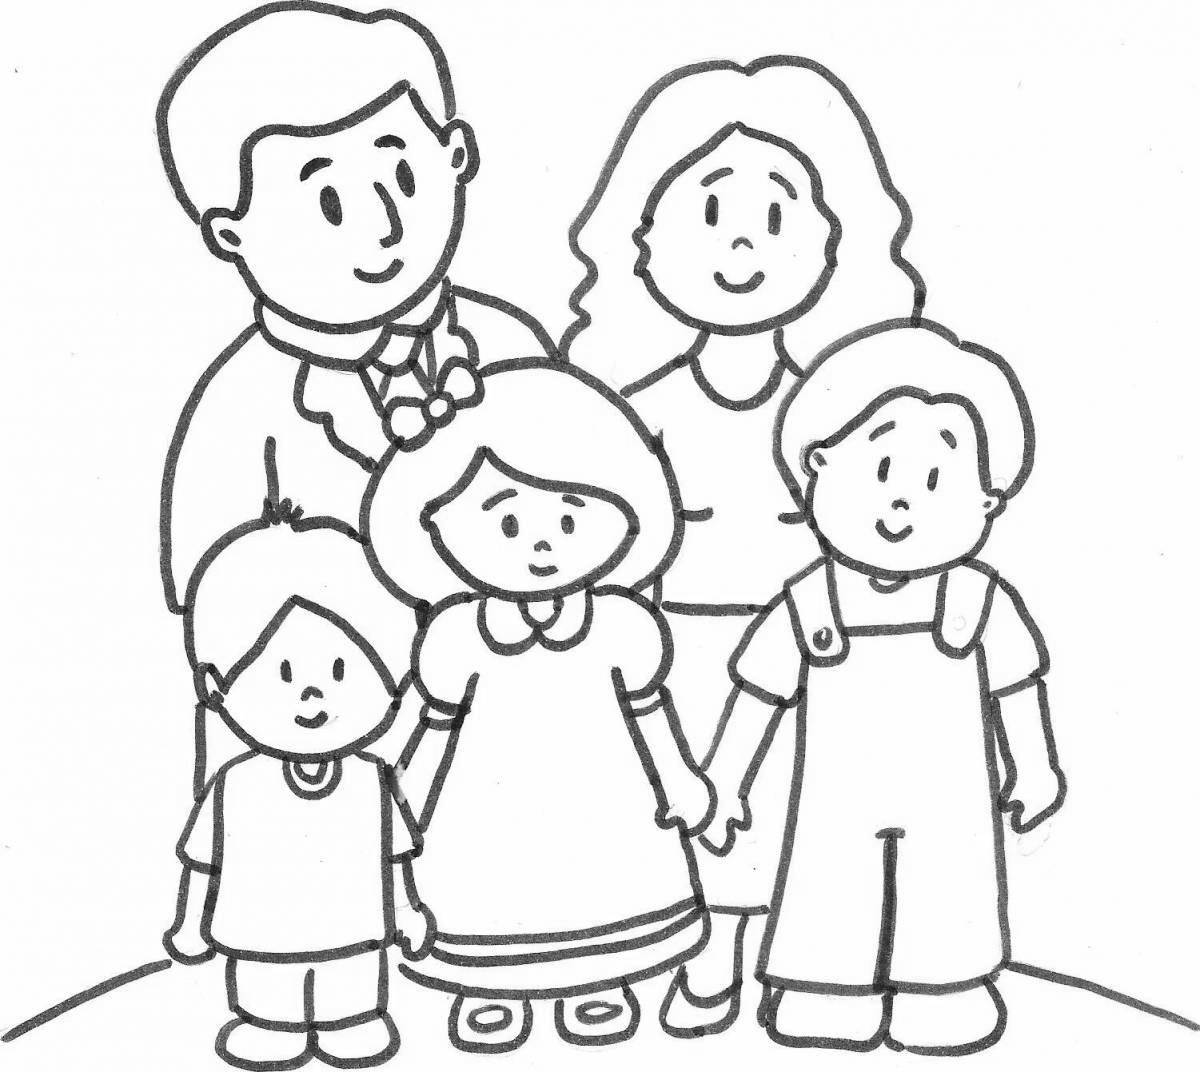 Delightful family coloring book